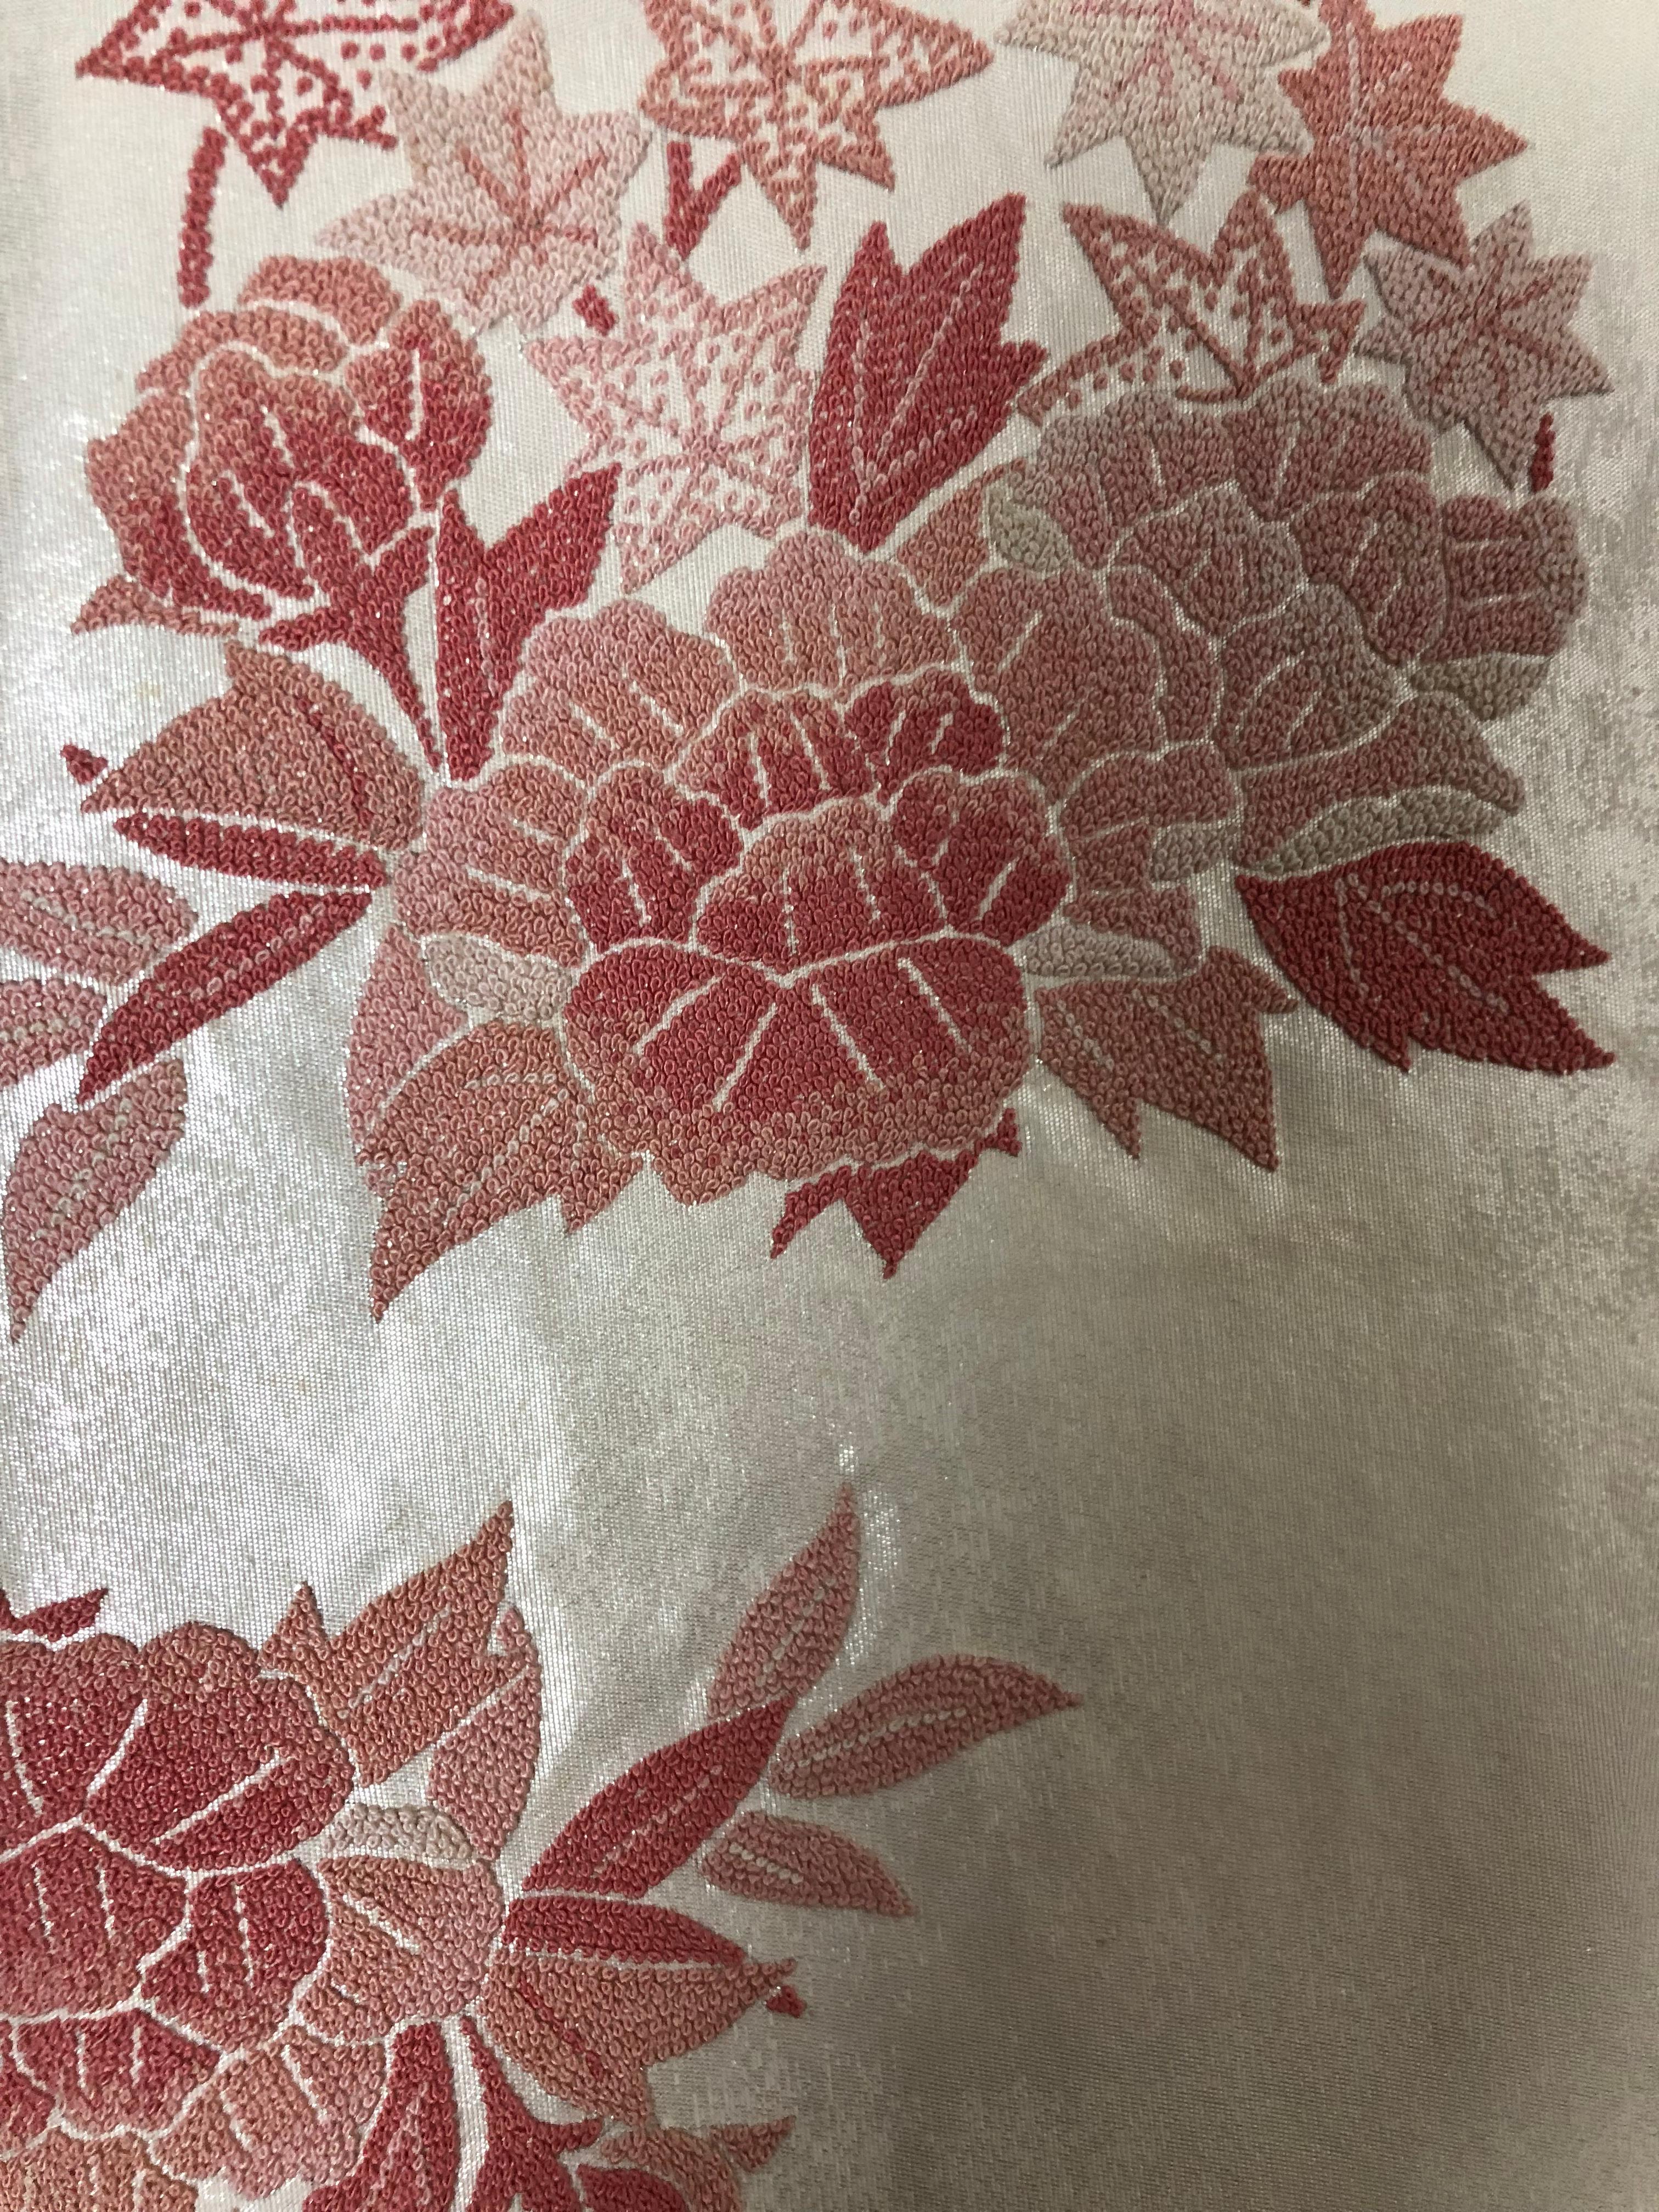 Kimono Art / Japanese Art / Wall Decoration, -Peony Scroll- In New Condition For Sale In Shibuya City, Tokyo